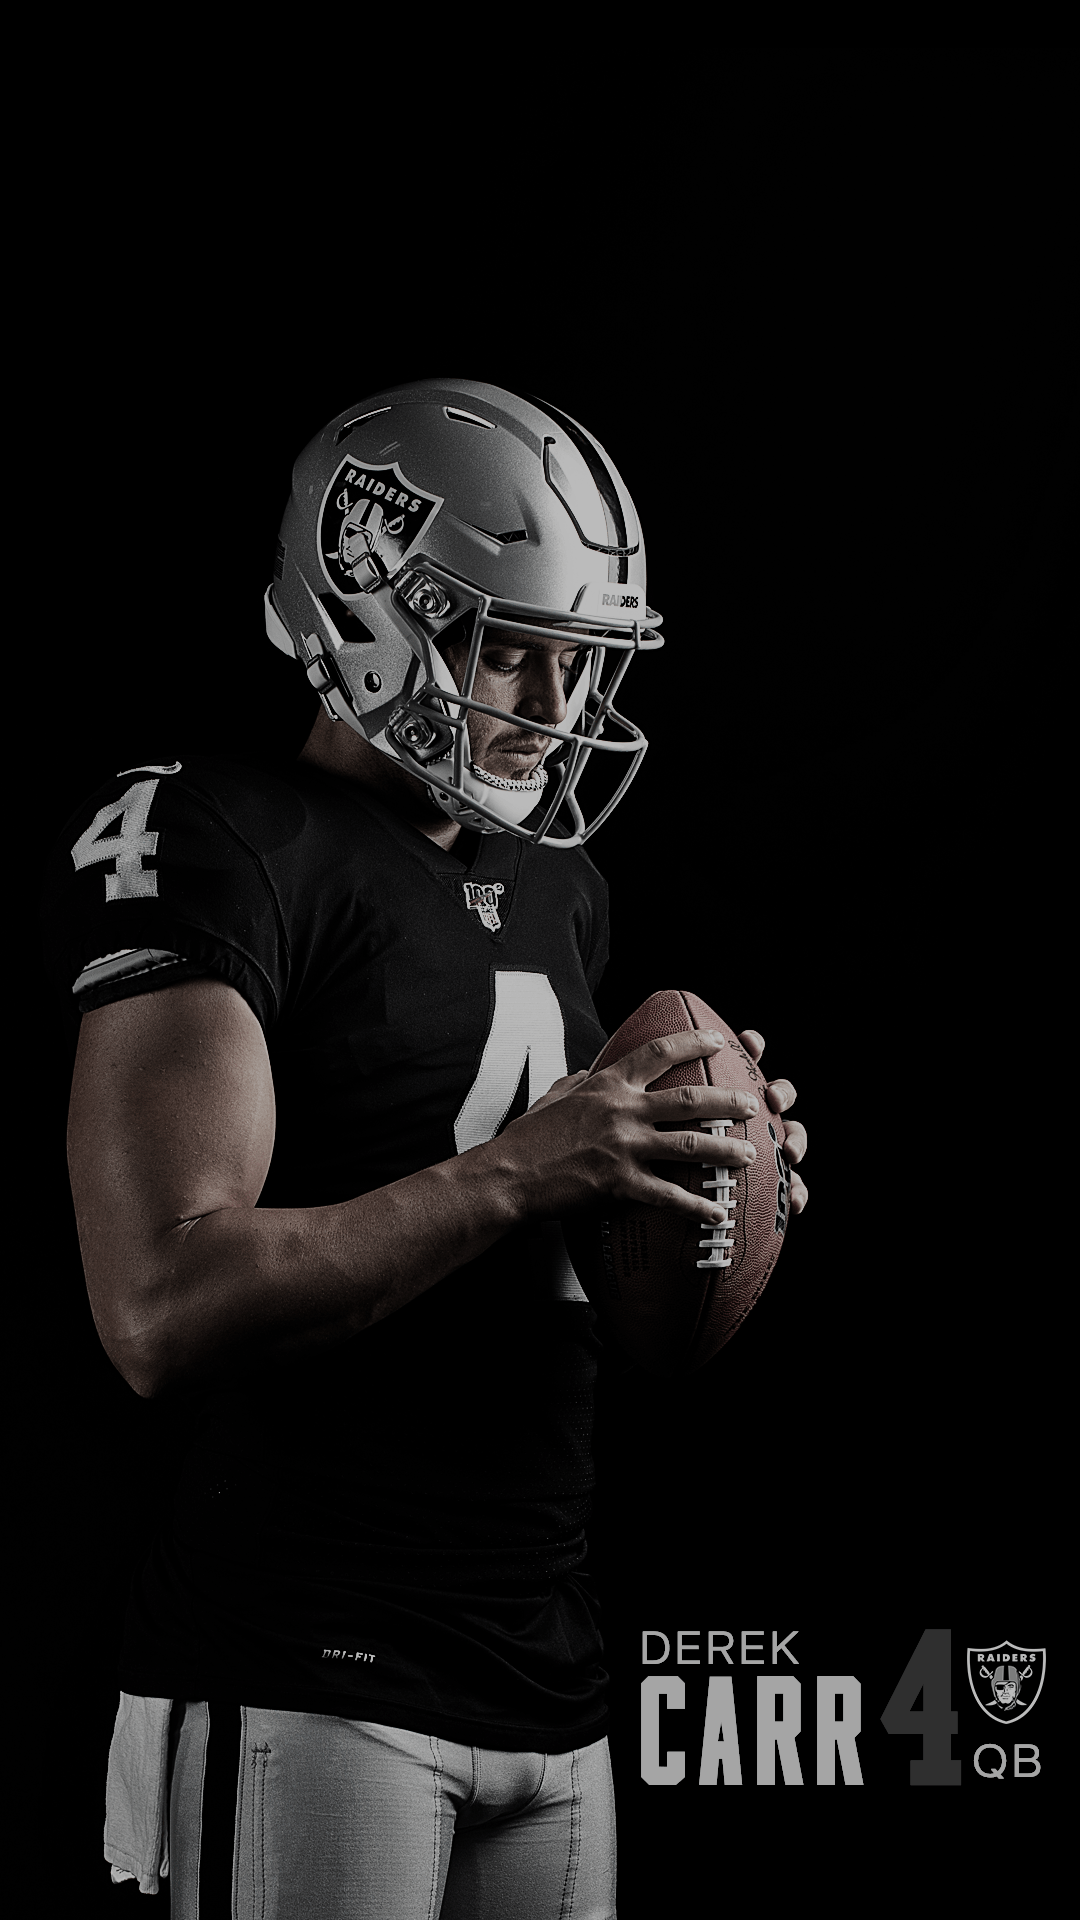 Download Raiders Wallpaper by Fcmaci  7b  Free on ZEDGE now Browse  millions of popular r  Oakland raiders wallpapers Raiders wallpaper Oakland  raiders funny